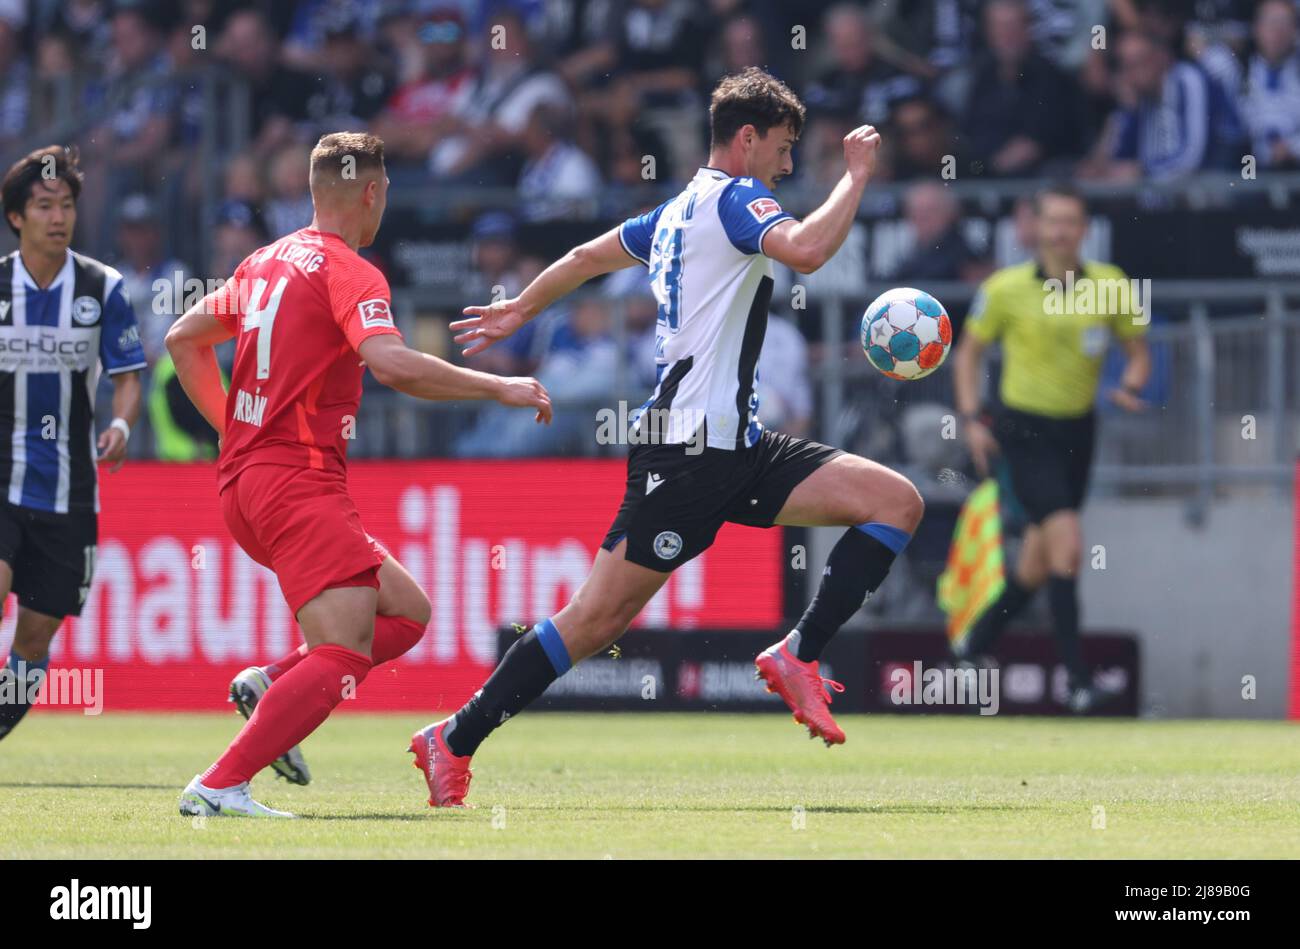 Bielefeld, Germany. 14th May, 2022. Soccer: Bundesliga, Arminia Bielefeld - RB Leipzig, Matchday 34 at the Schüco Arena. Bielefeld's Janni Serra (r) battles for the ball with Leipzig's Willi Orban (2nd from left). Credit: Friso Gentsch/dpa - IMPORTANT NOTE: In accordance with the requirements of the DFL Deutsche Fußball Liga and the DFB Deutscher Fußball-Bund, it is prohibited to use or have used photographs taken in the stadium and/or of the match in the form of sequence pictures and/or video-like photo series./dpa/Alamy Live News Stock Photo